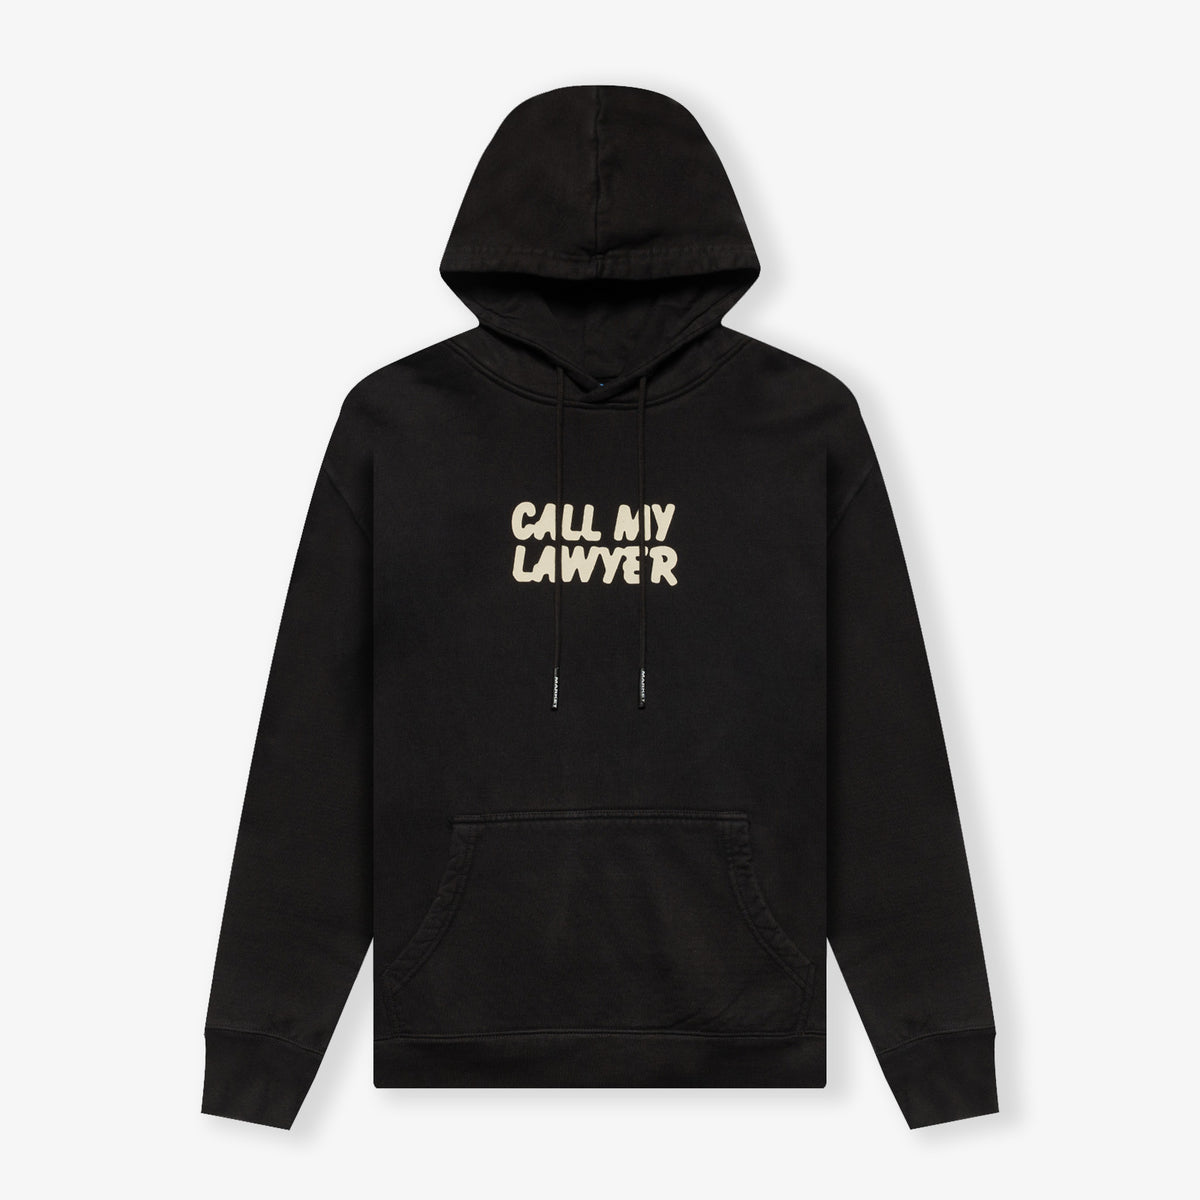 Not Guilty Hoodie - Washed Black